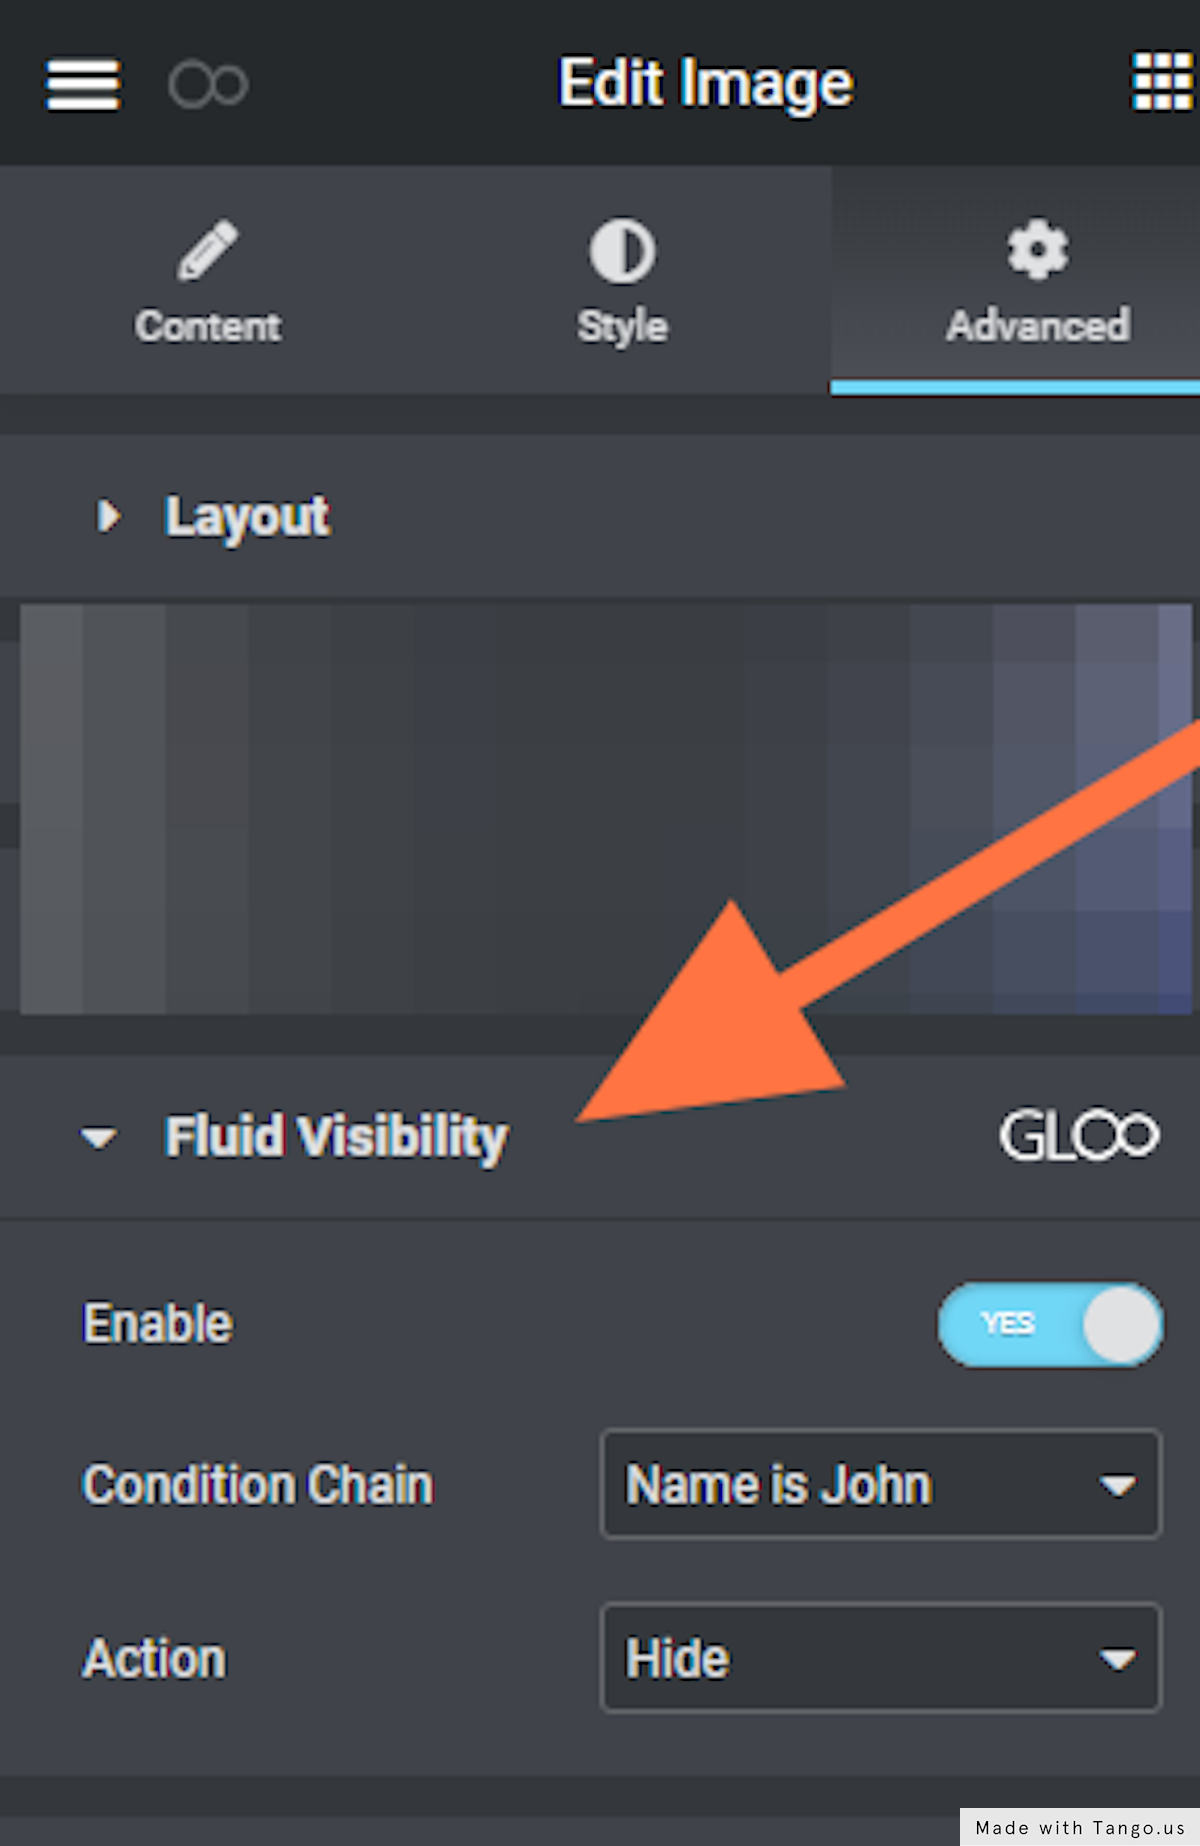 Click on Fluid Visibility